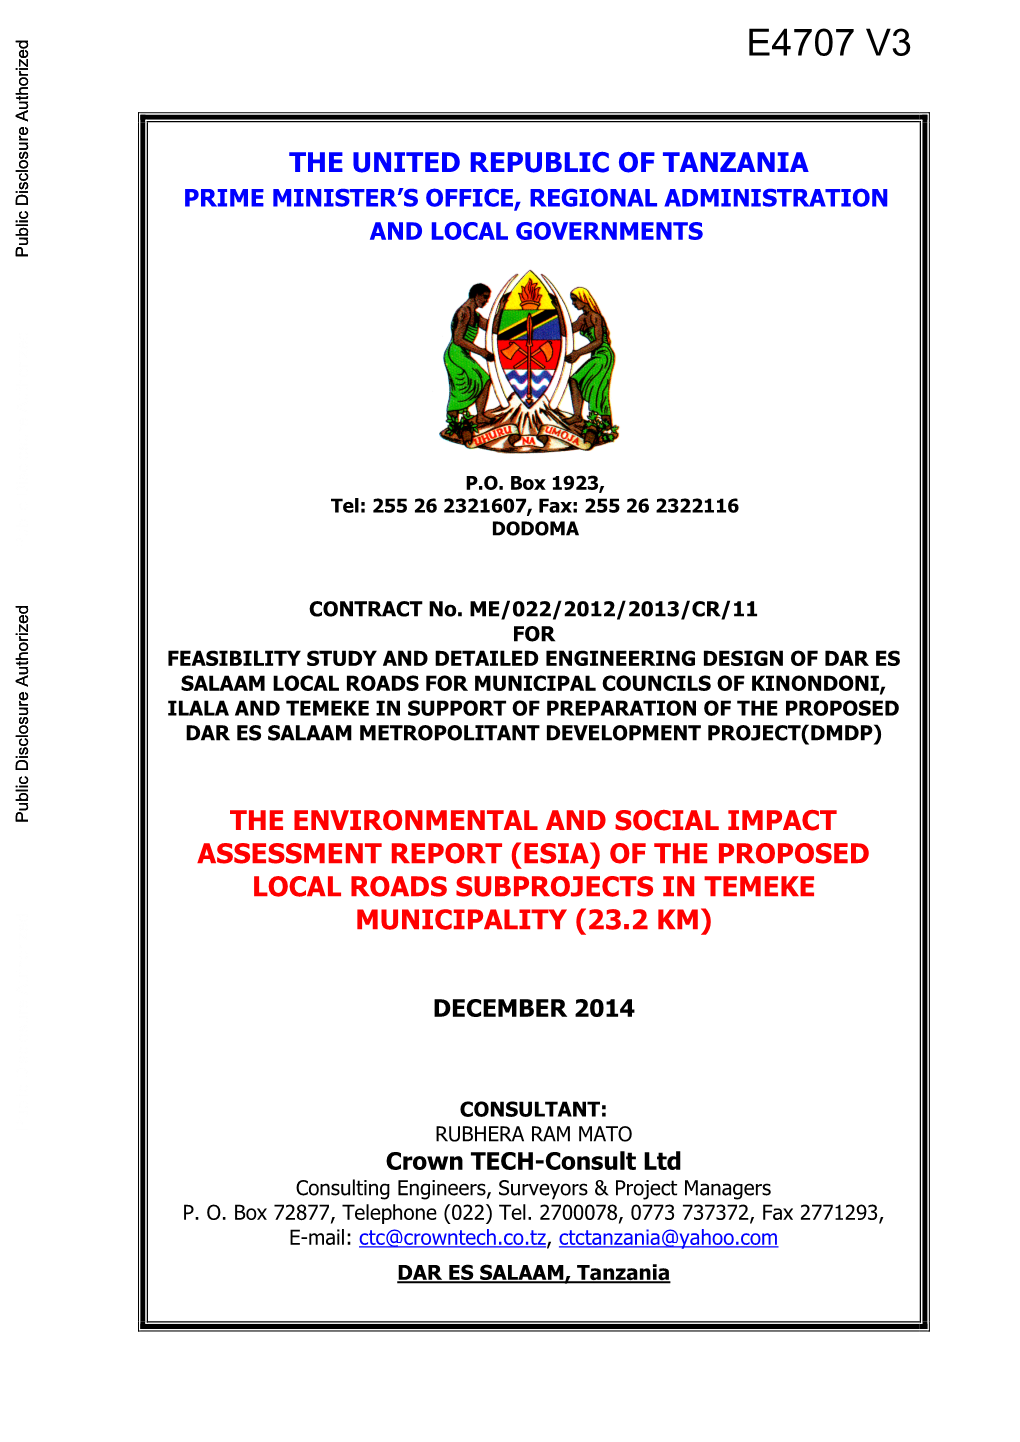 THE UNITED REPUBLIC of TANZANIA PRIME MINISTER’S OFFICE, REGIONAL ADMINISTRATION and LOCAL GOVERNMENTS Public Disclosure Authorized